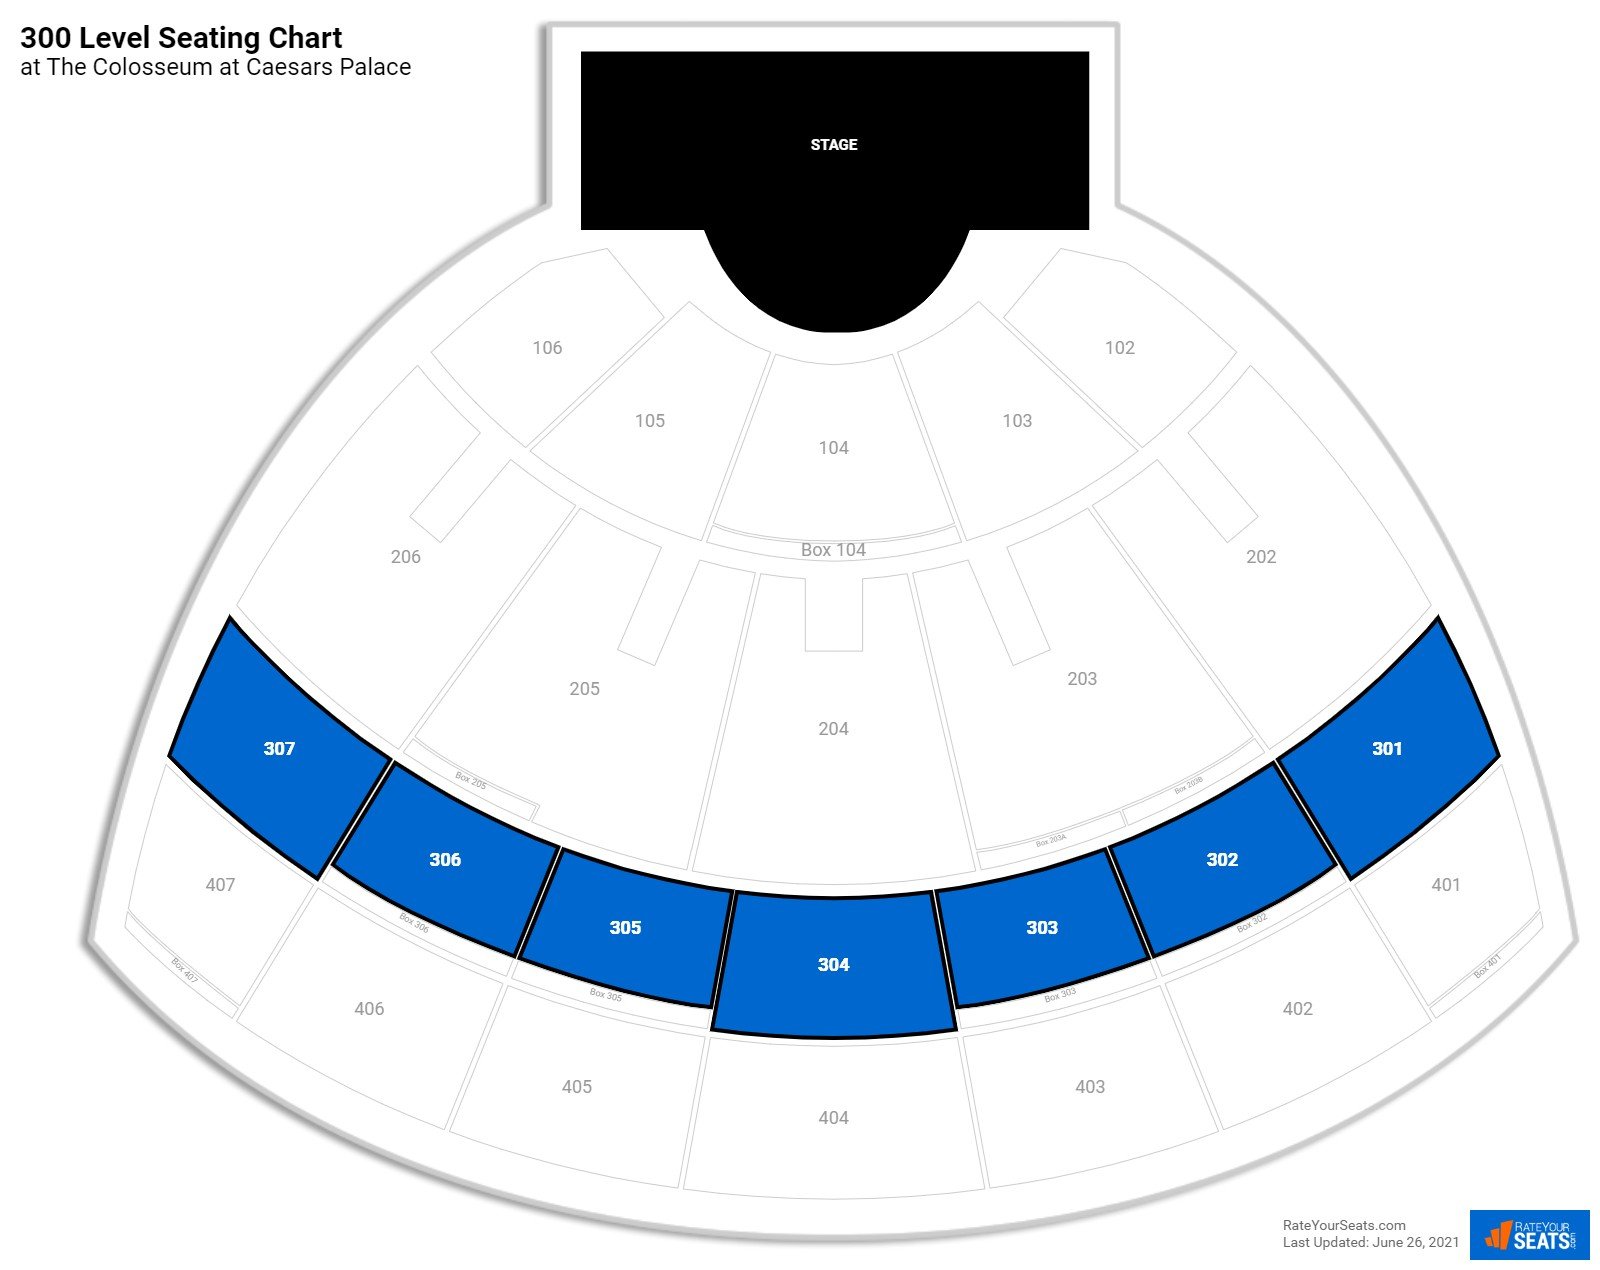 Concert 300 Level Seating Chart at The Colosseum at Caesars Palace